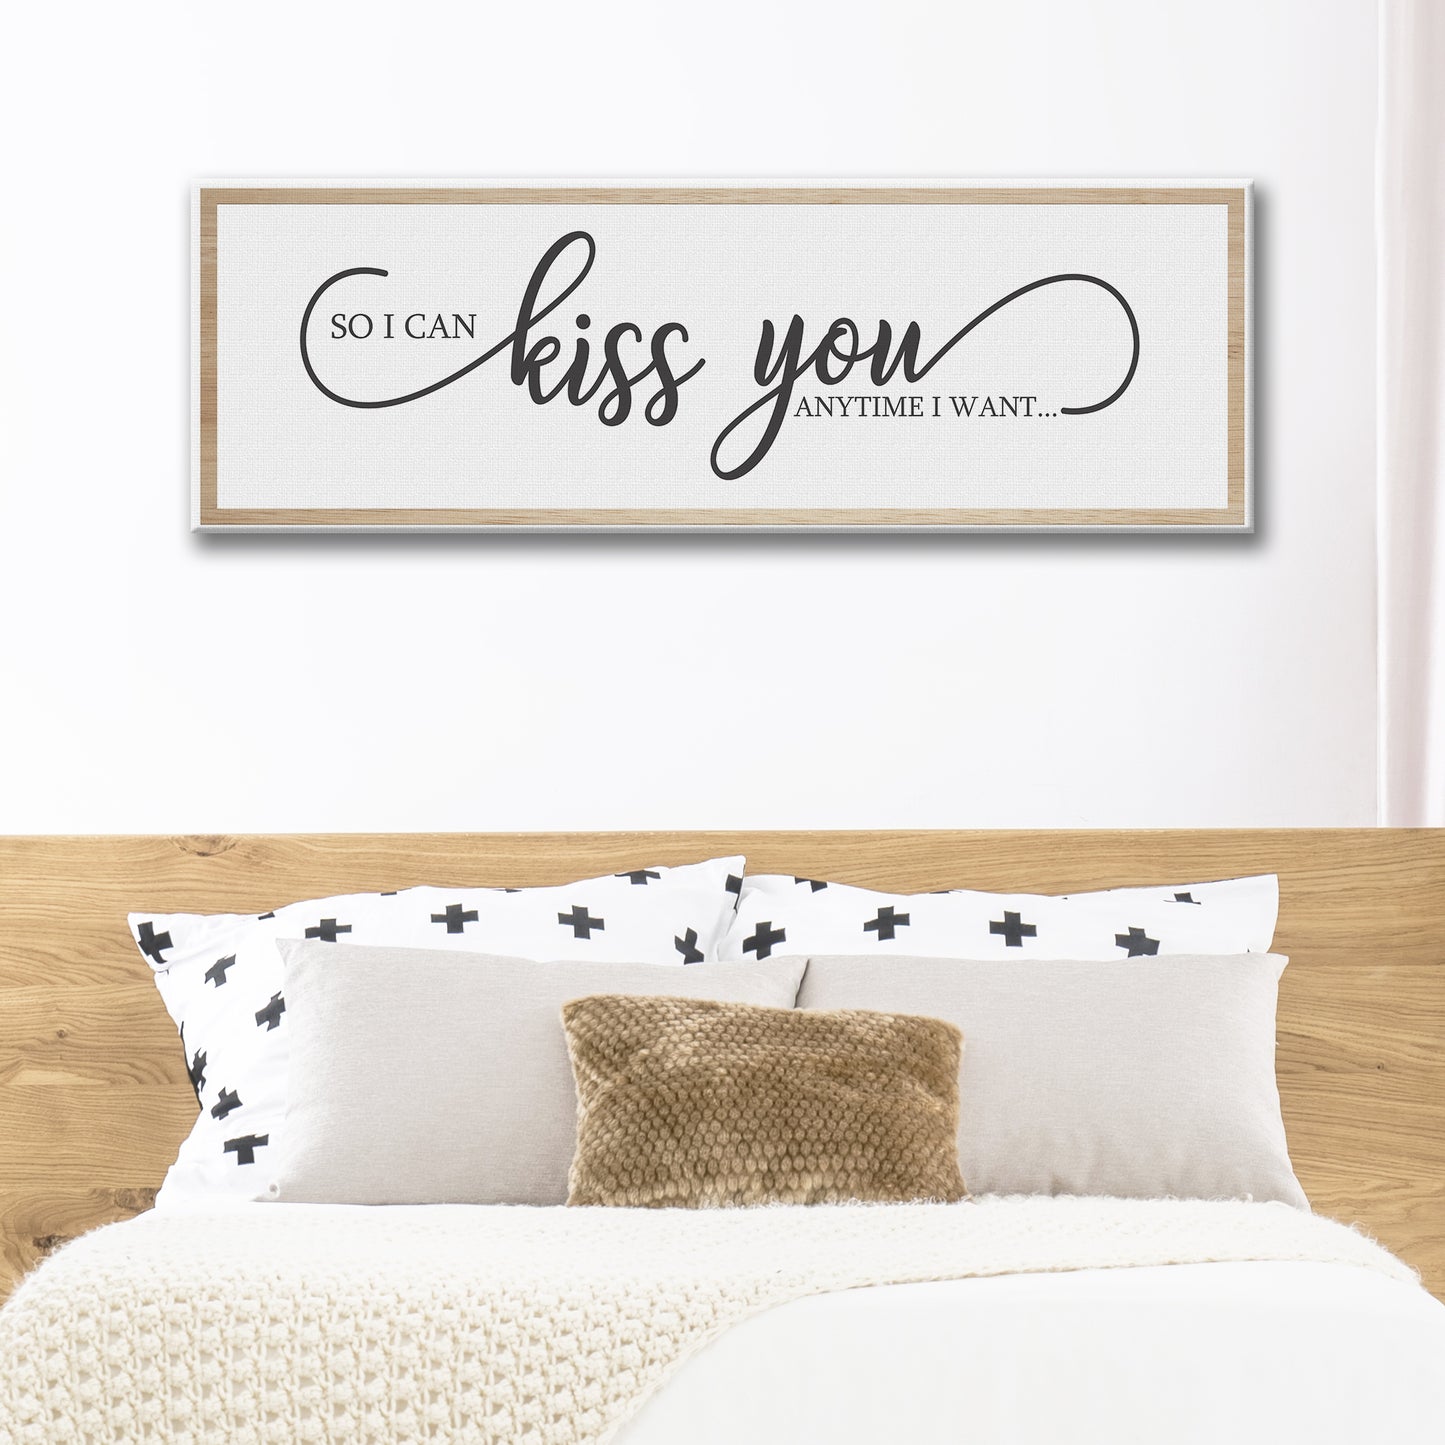 So I can Kiss you anytime I Want Sign - Image by Tailored Canvases